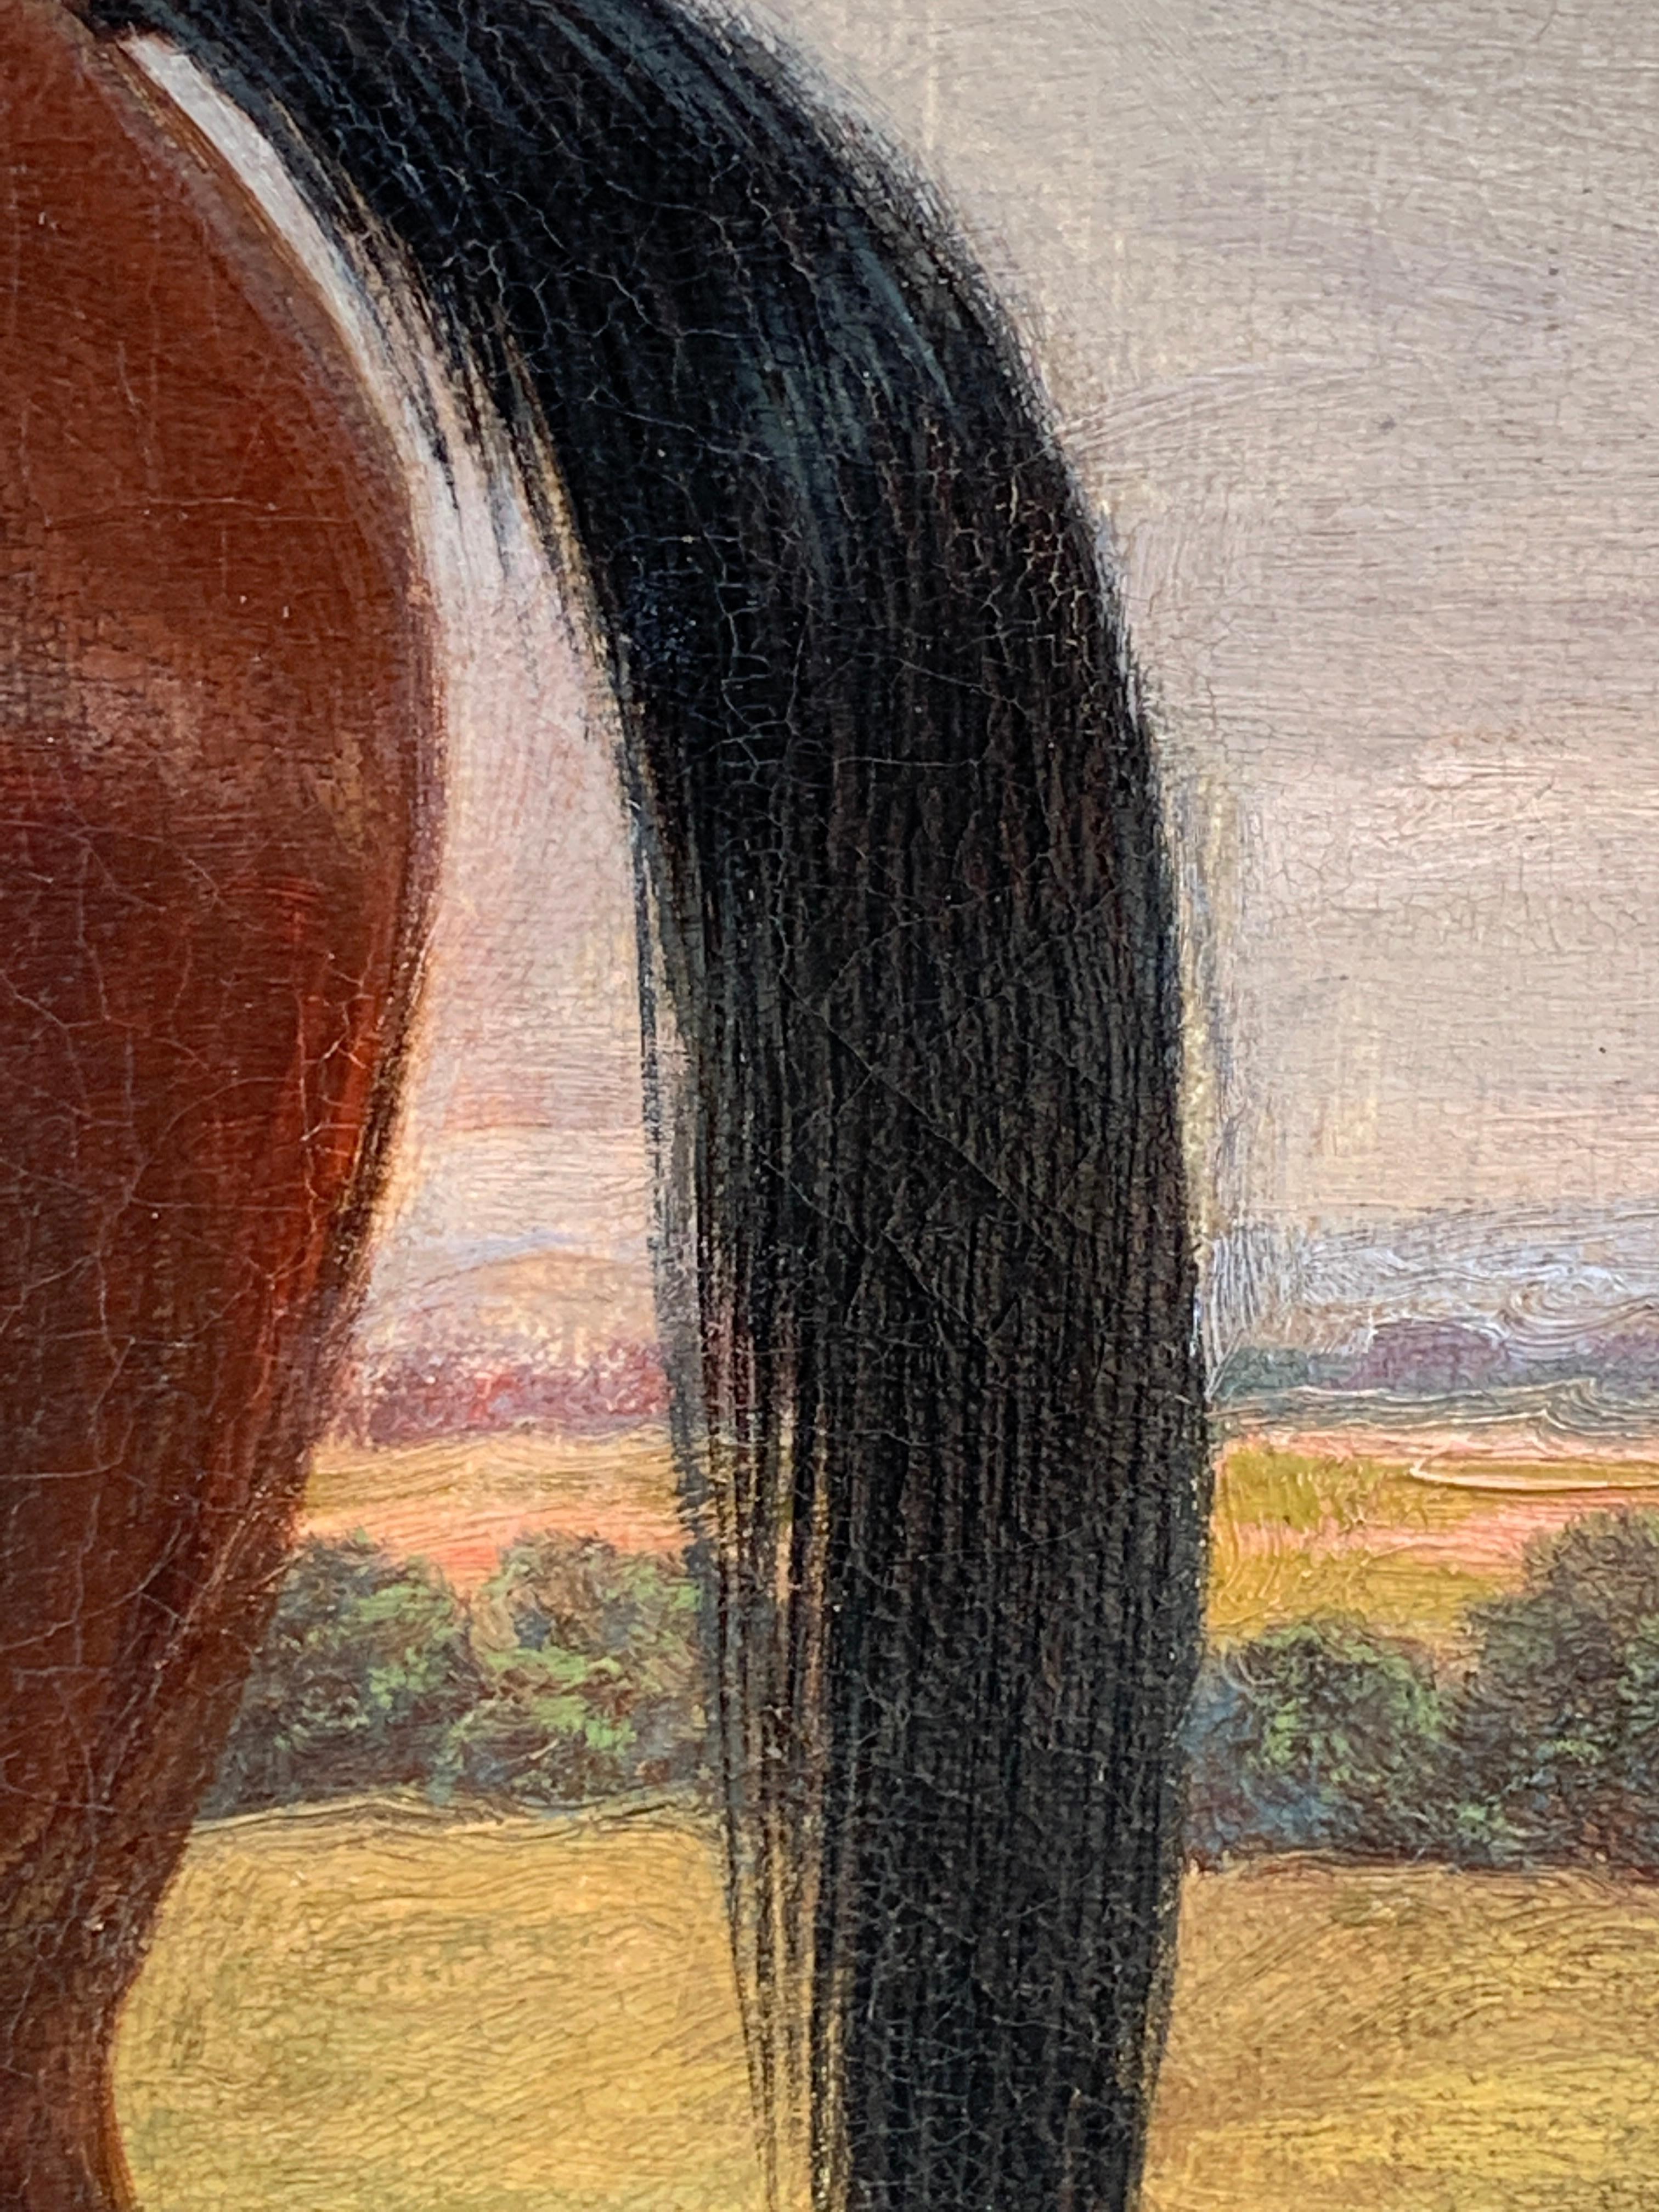 Well-painted English 19th century portrait of a horse in a landscape. 


Born in Melton Mowbray 1815 and died in Leeds 1862 
He was the eldest son of  John Ferneley Senior, and brother to Claude Lorraine Ferneley but little else is known about his